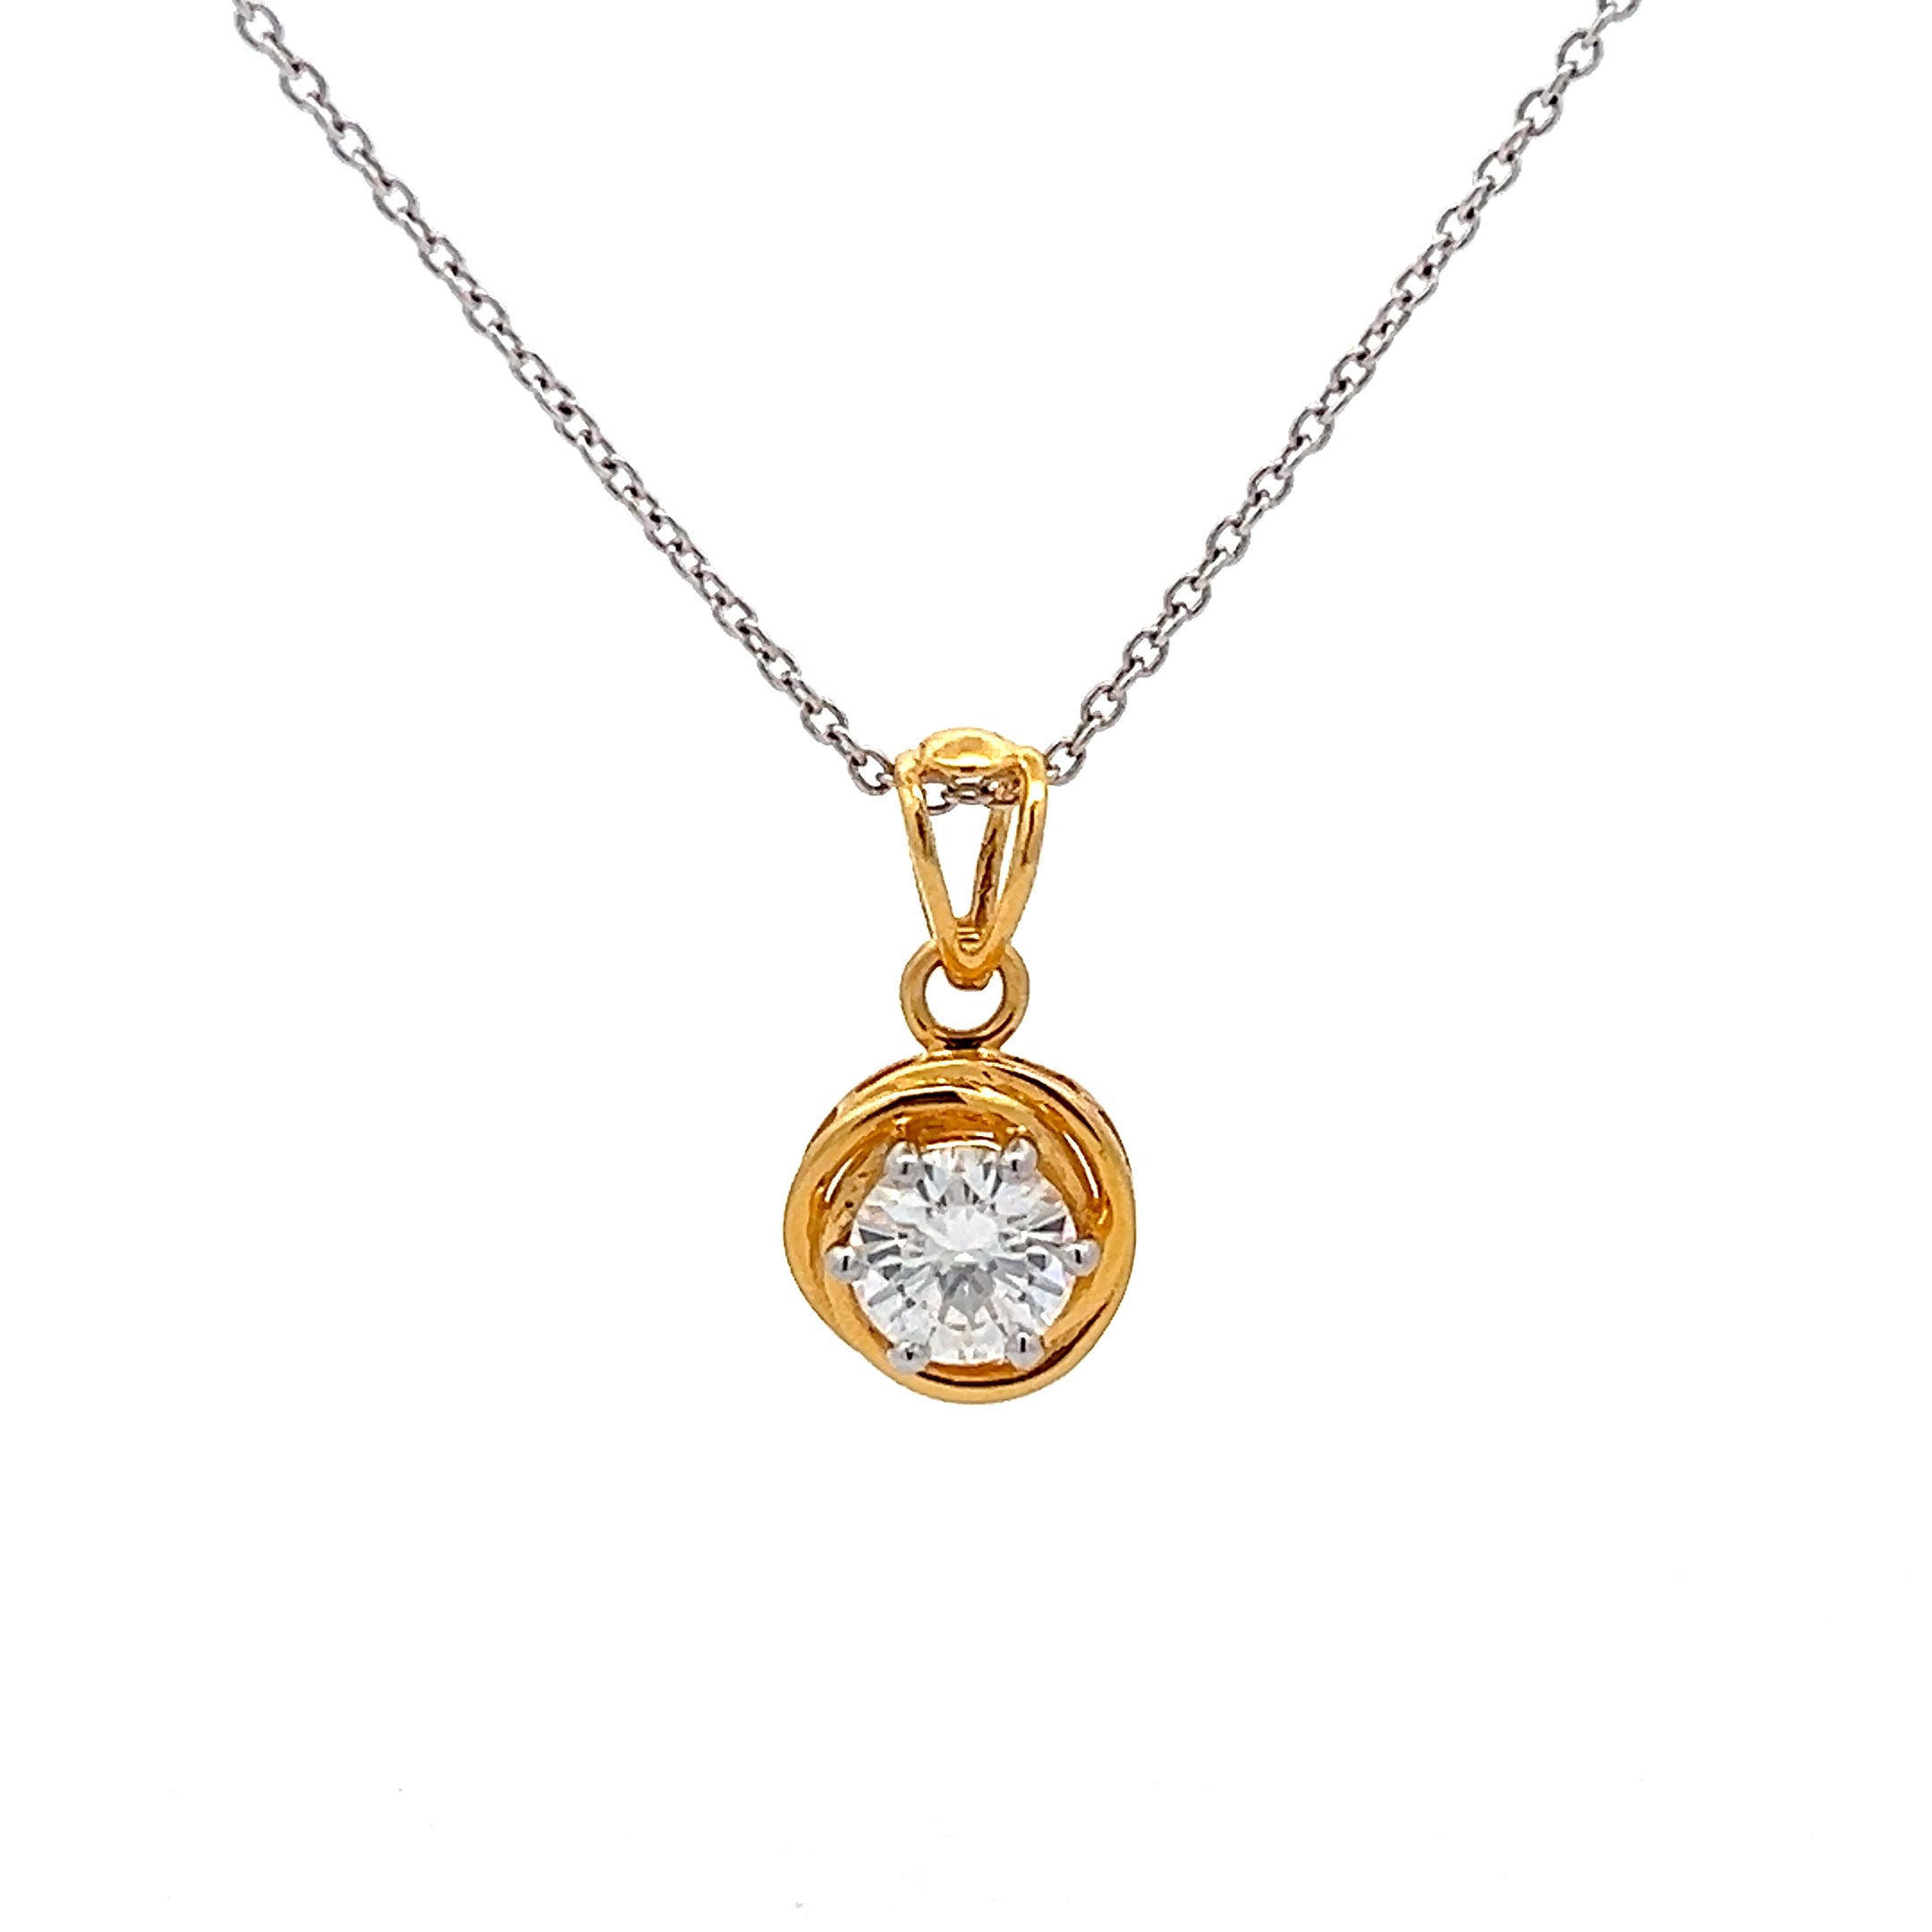 Bright sun Pendant is 1.25ct in Round Shape solitaire 14K gold with Lab Grown Moissanite